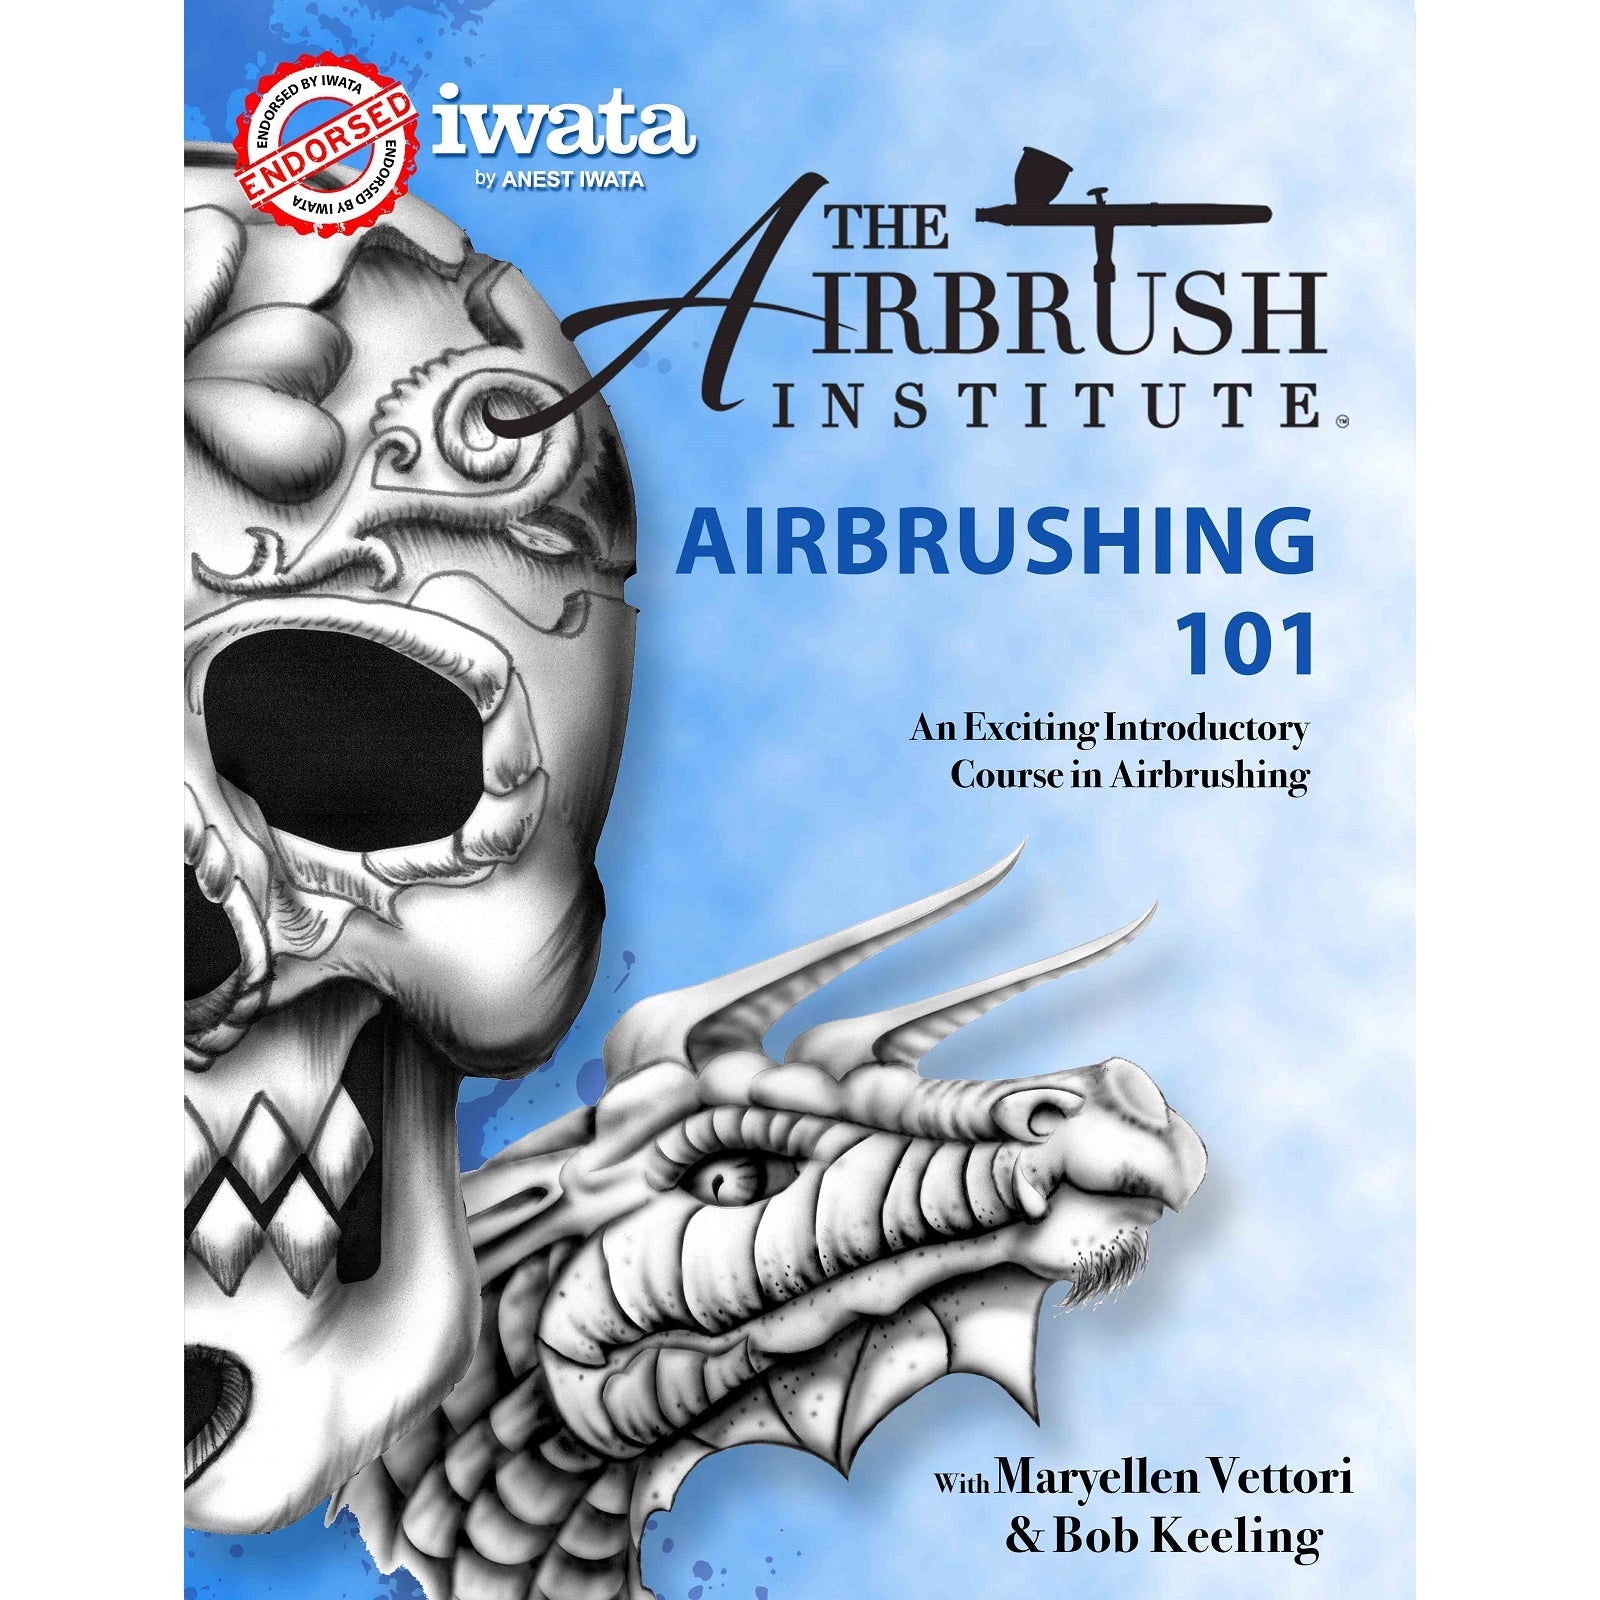 "Airbrushing 101" by The Airbrush Institute Book